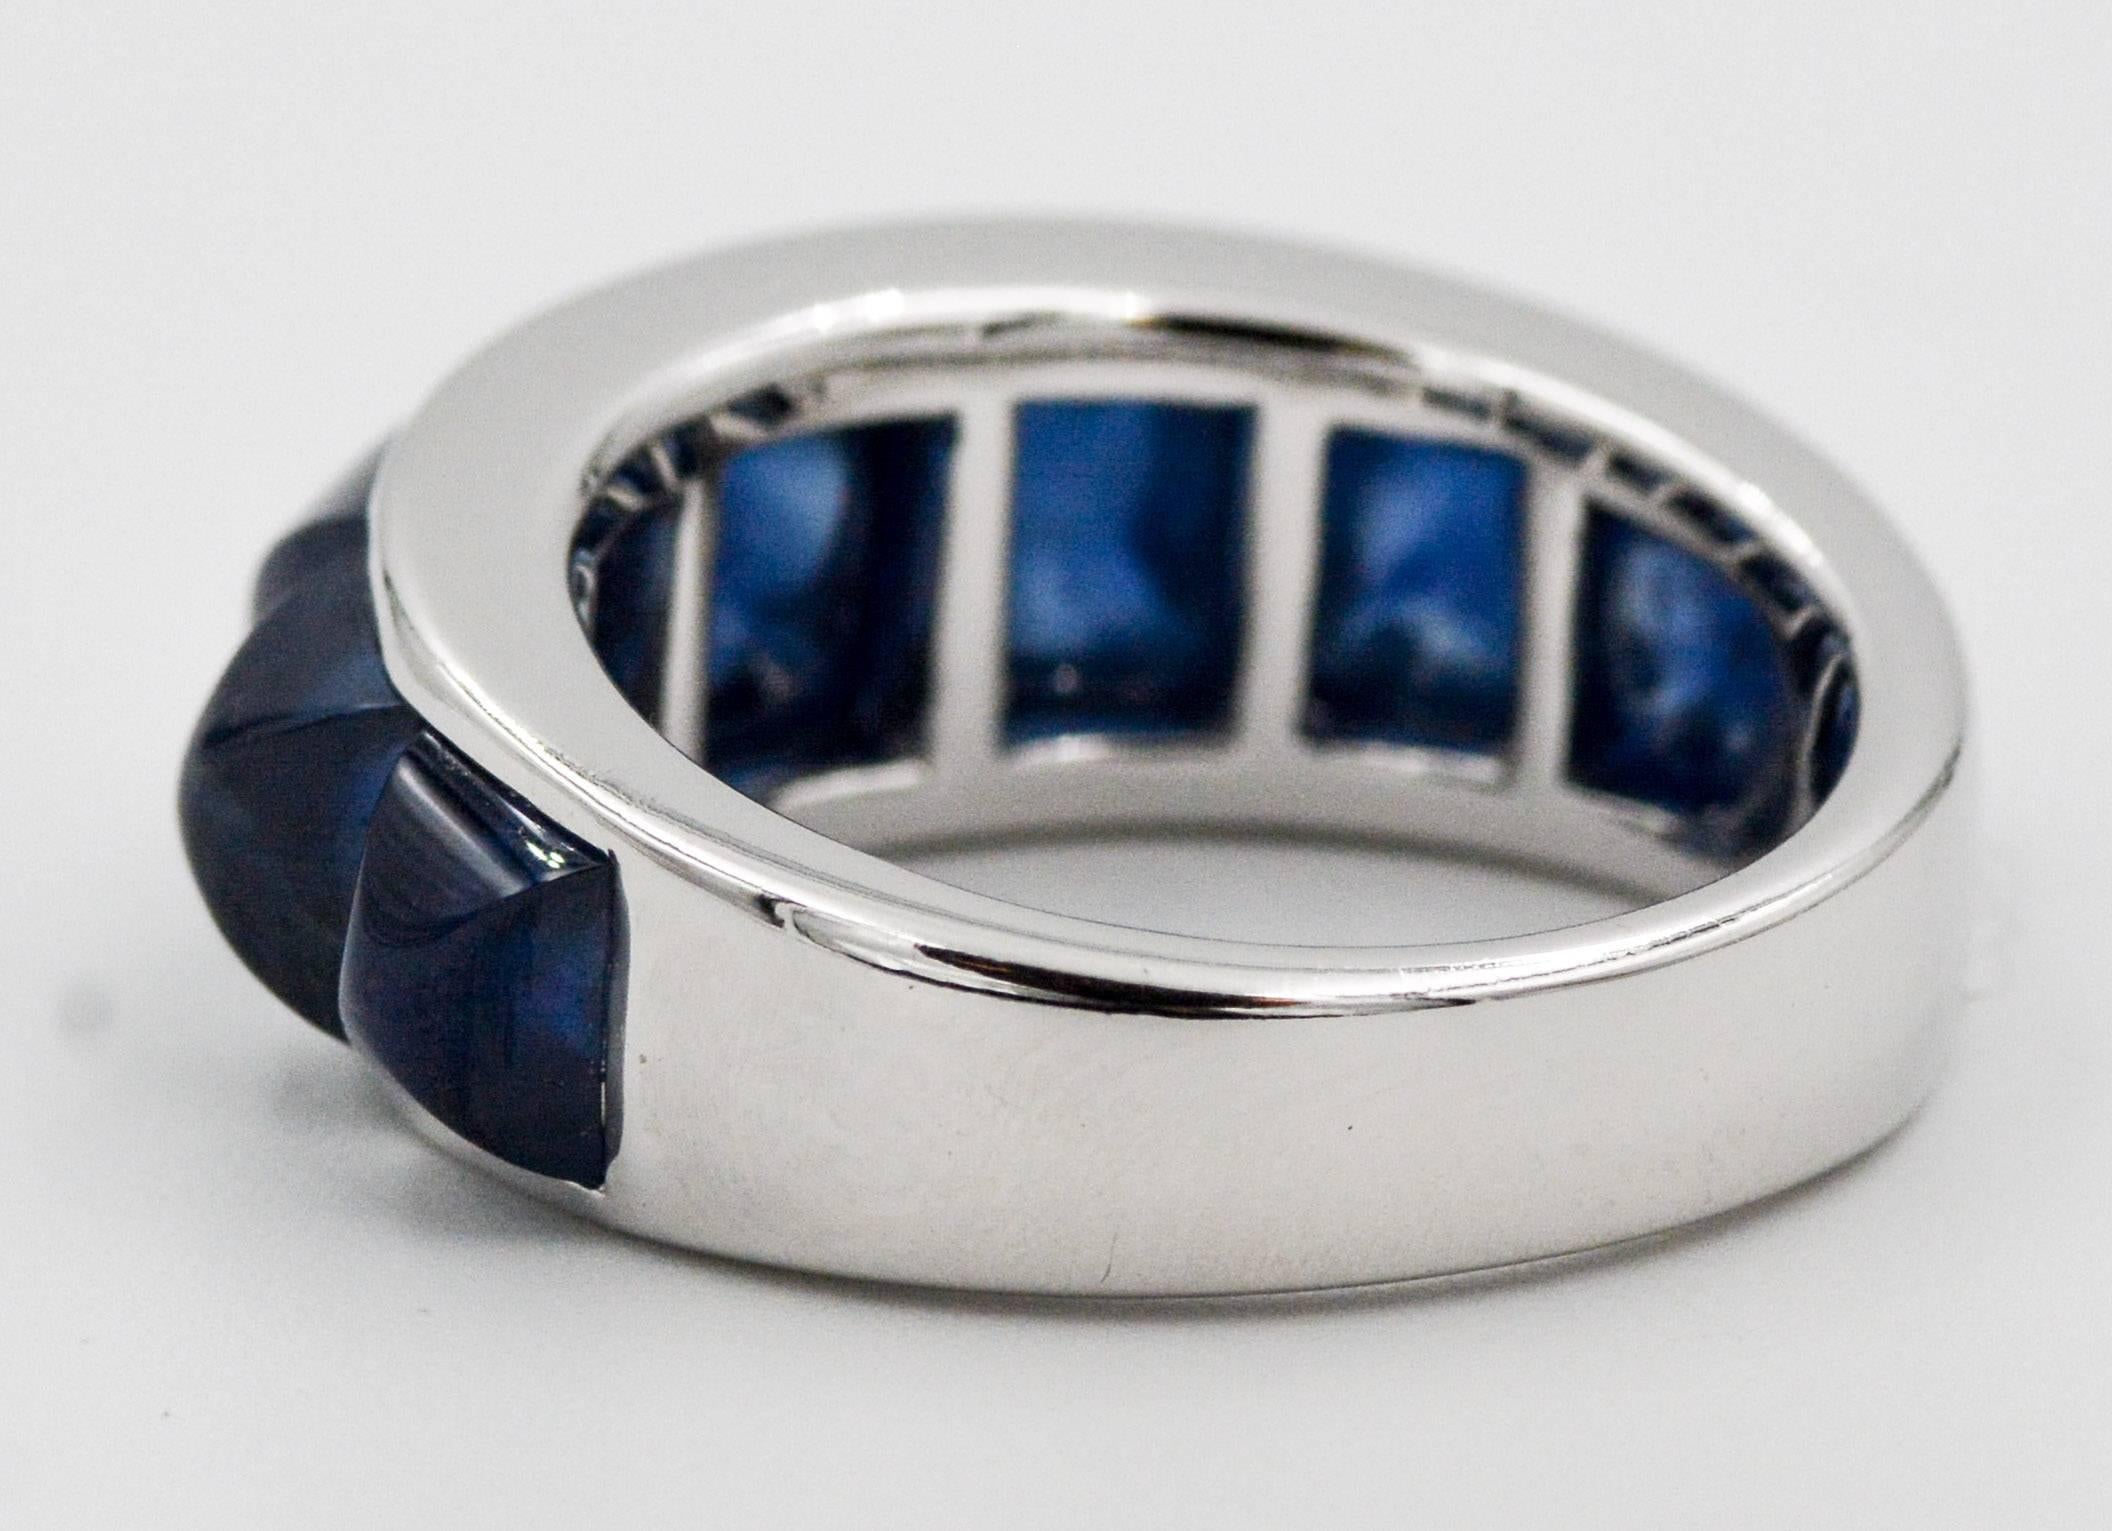 This Seaman Schepps Portofino ring is crafted of 18kt white with a channel of seven beautiful sugar loaf cut blue sapphire gems. The Sapphired gems have combined weight of 8.68 carats. The Portofino ring is stamped Seaman Schepps 243401.  The ring